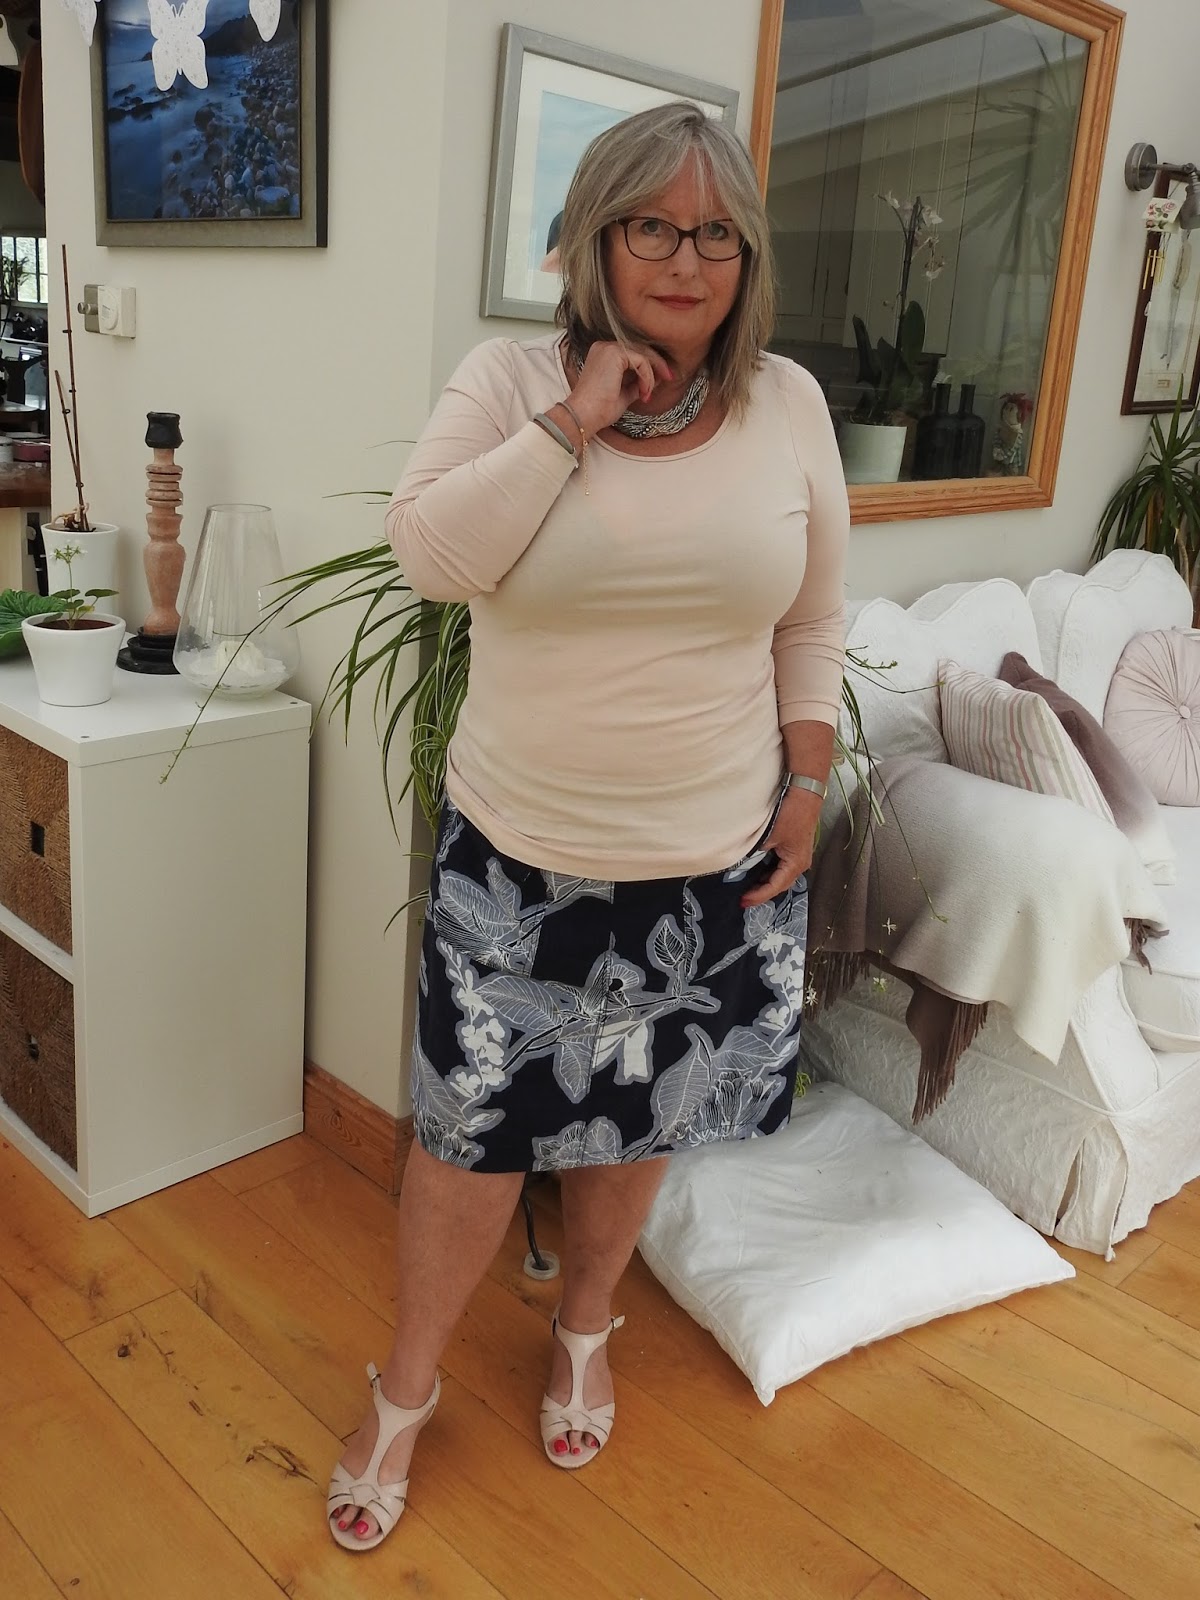 The Pouting Pensioner: Navy Skirt Gets A Try-On Session